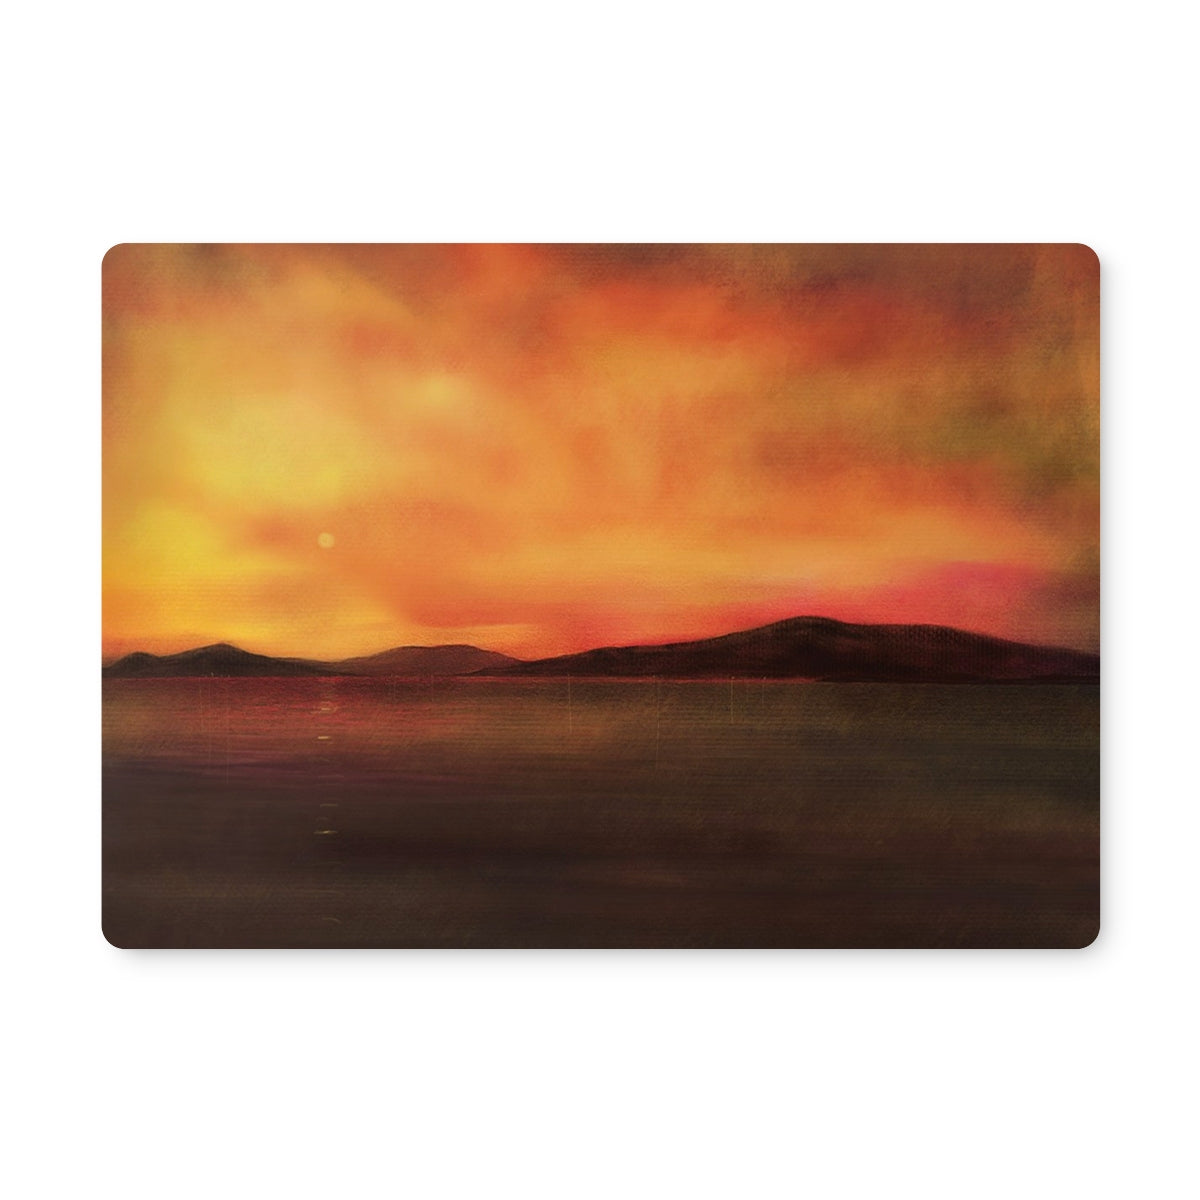 Harris Sunset Art Gifts Placemat-Placemats-Hebridean Islands Art Gallery-6 Placemats-Paintings, Prints, Homeware, Art Gifts From Scotland By Scottish Artist Kevin Hunter